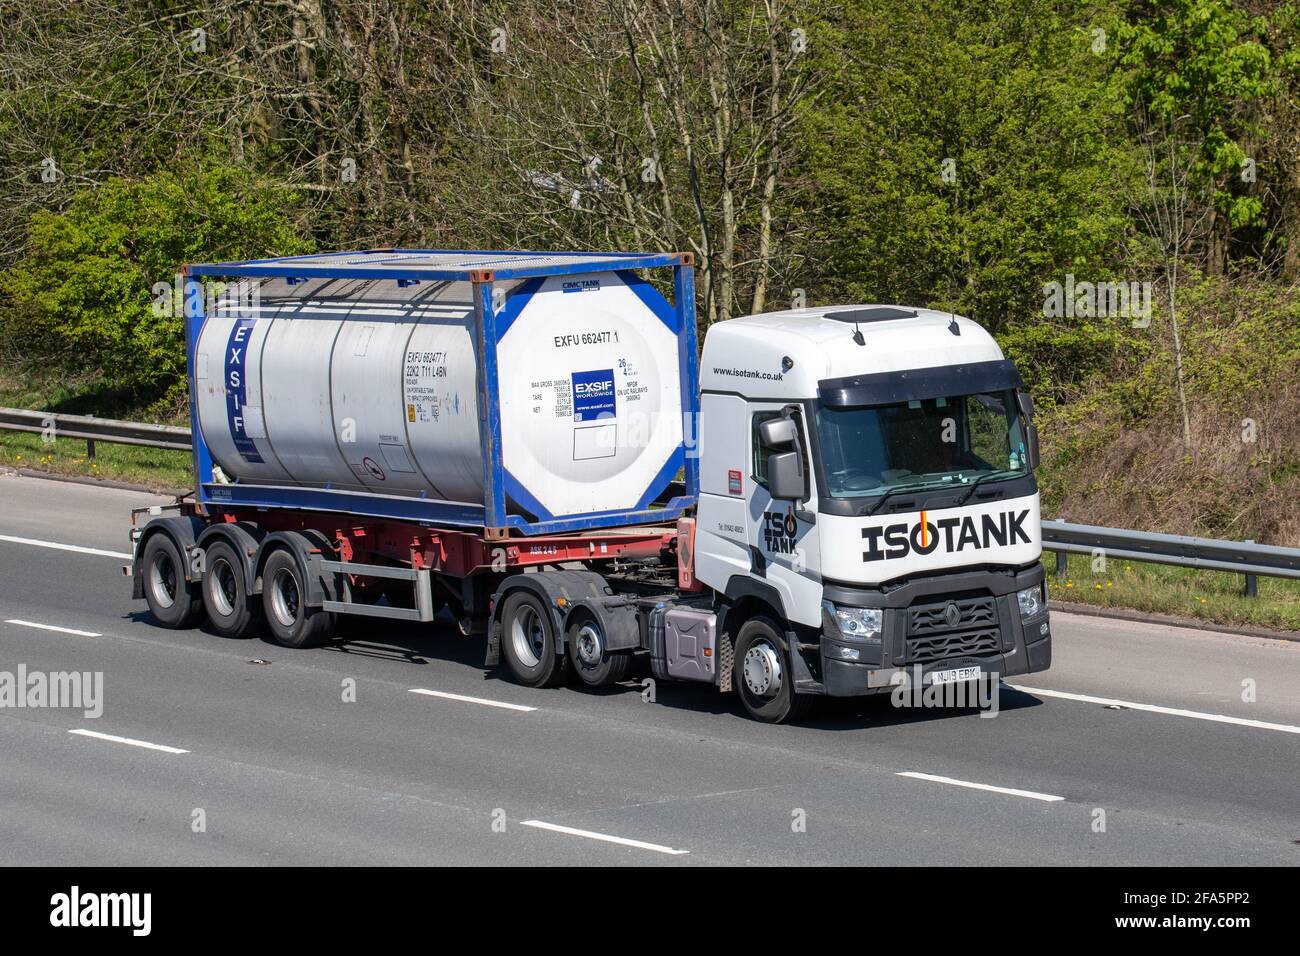 Renault Trucksa Exsif worldwide Un portable tank,  EXSIF Tank Container Leasing Liquid Transportation impact approved, foodstuffs only. Stock Photo